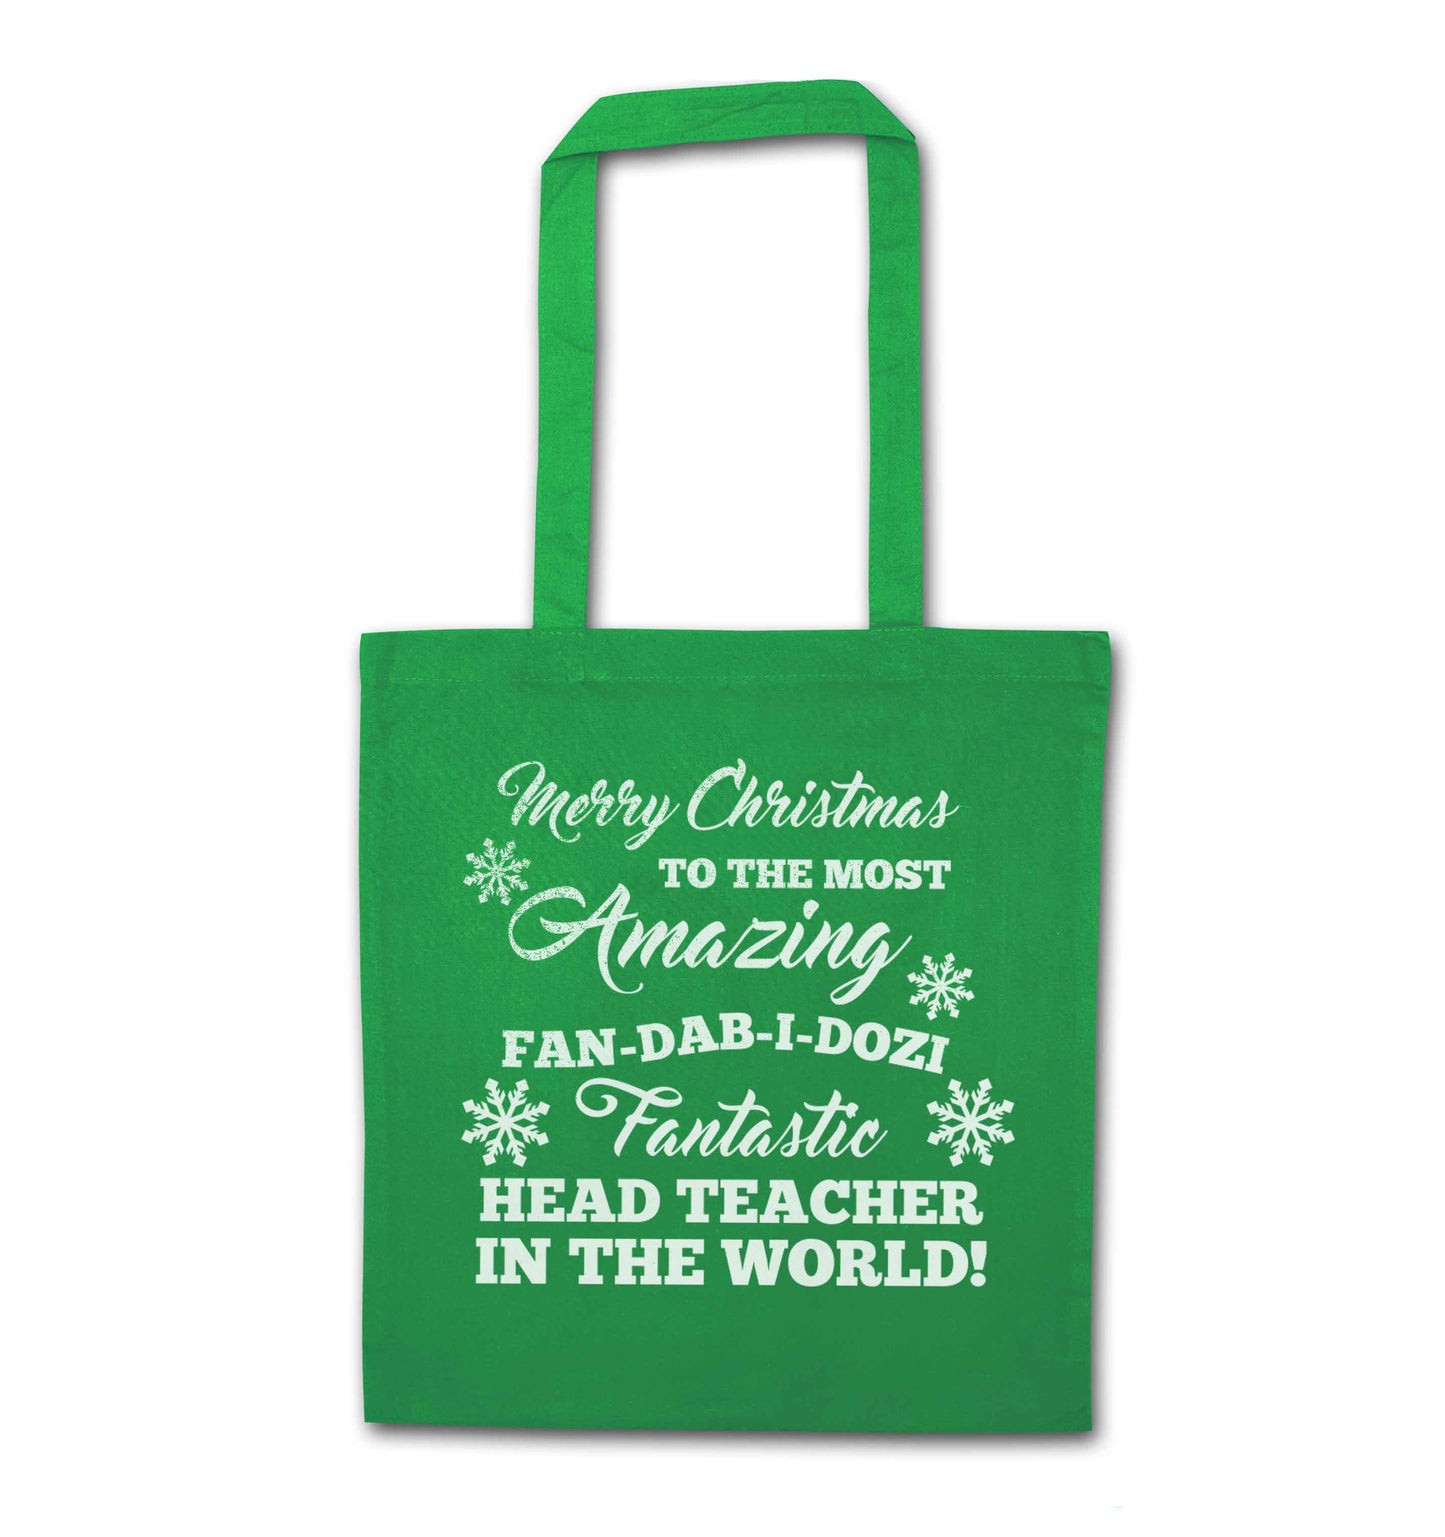 Merry Christmas to the most amazing fan-dab-i-dozi fantasic head teacher in the world green tote bag